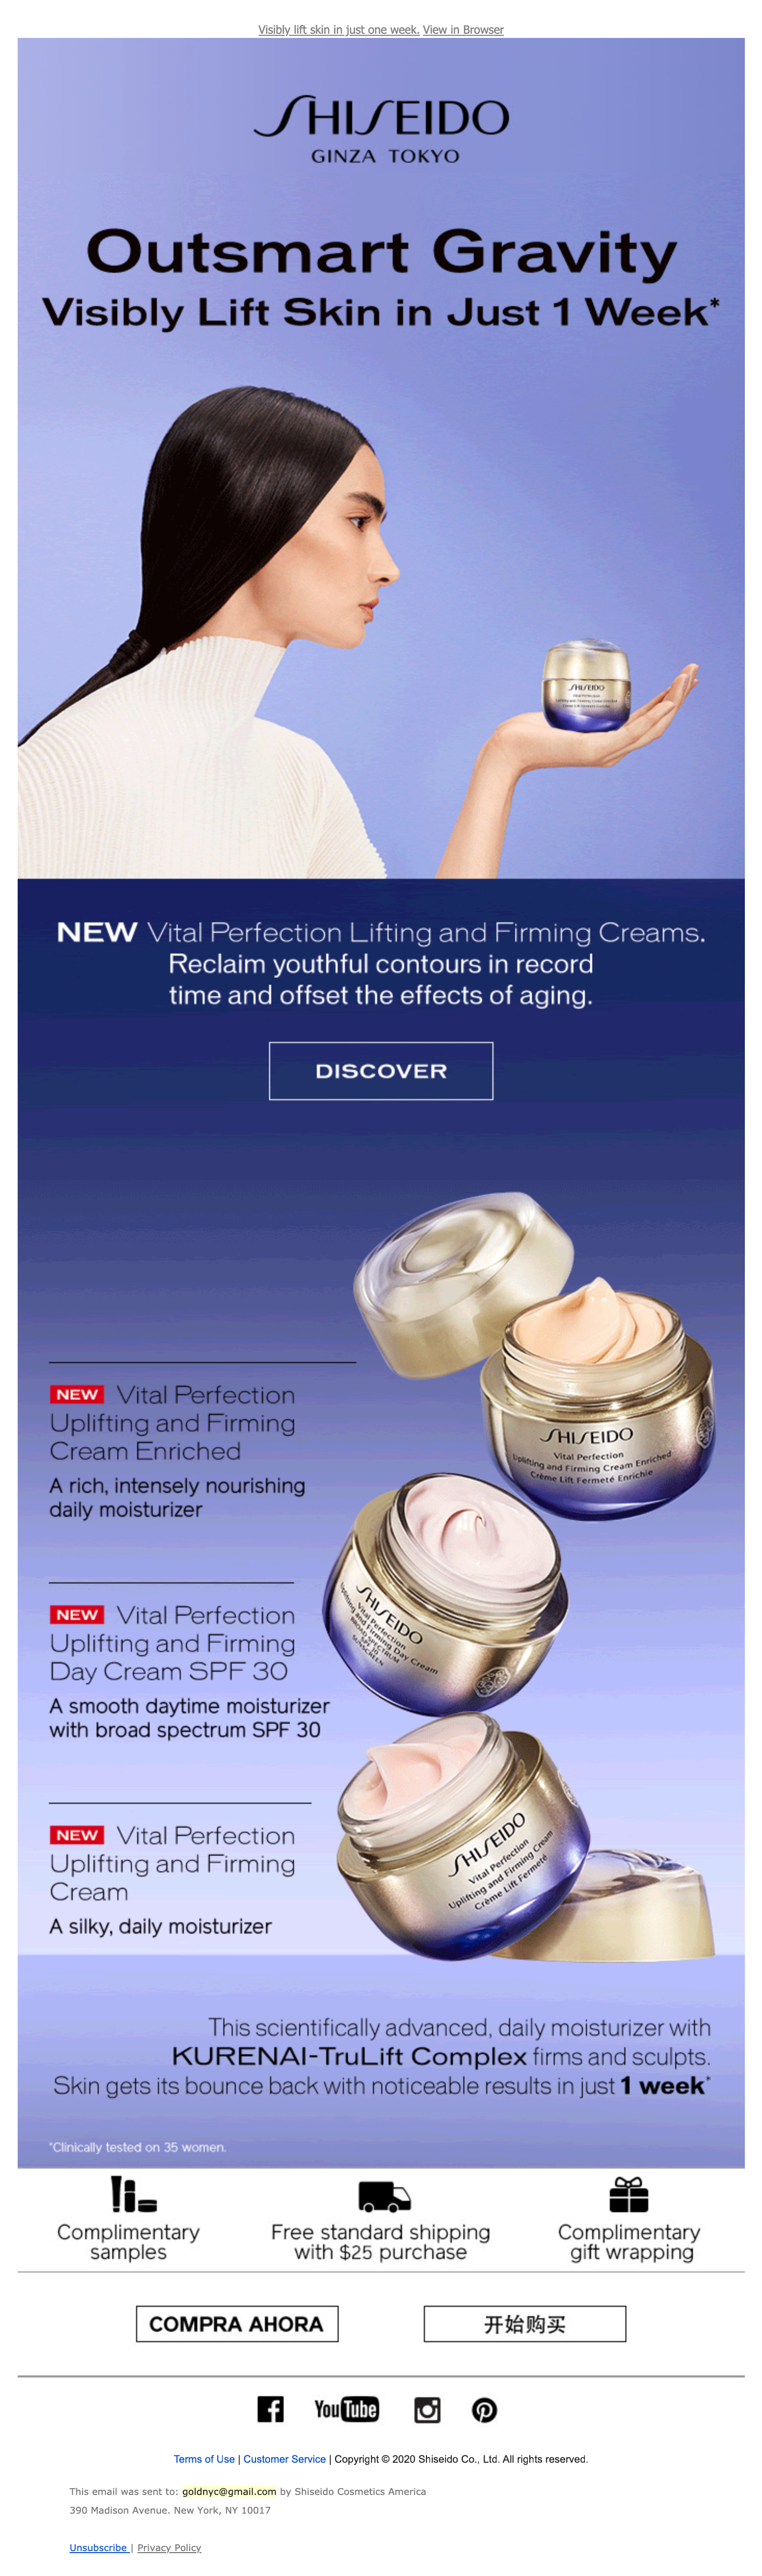 shiseido email 1.png